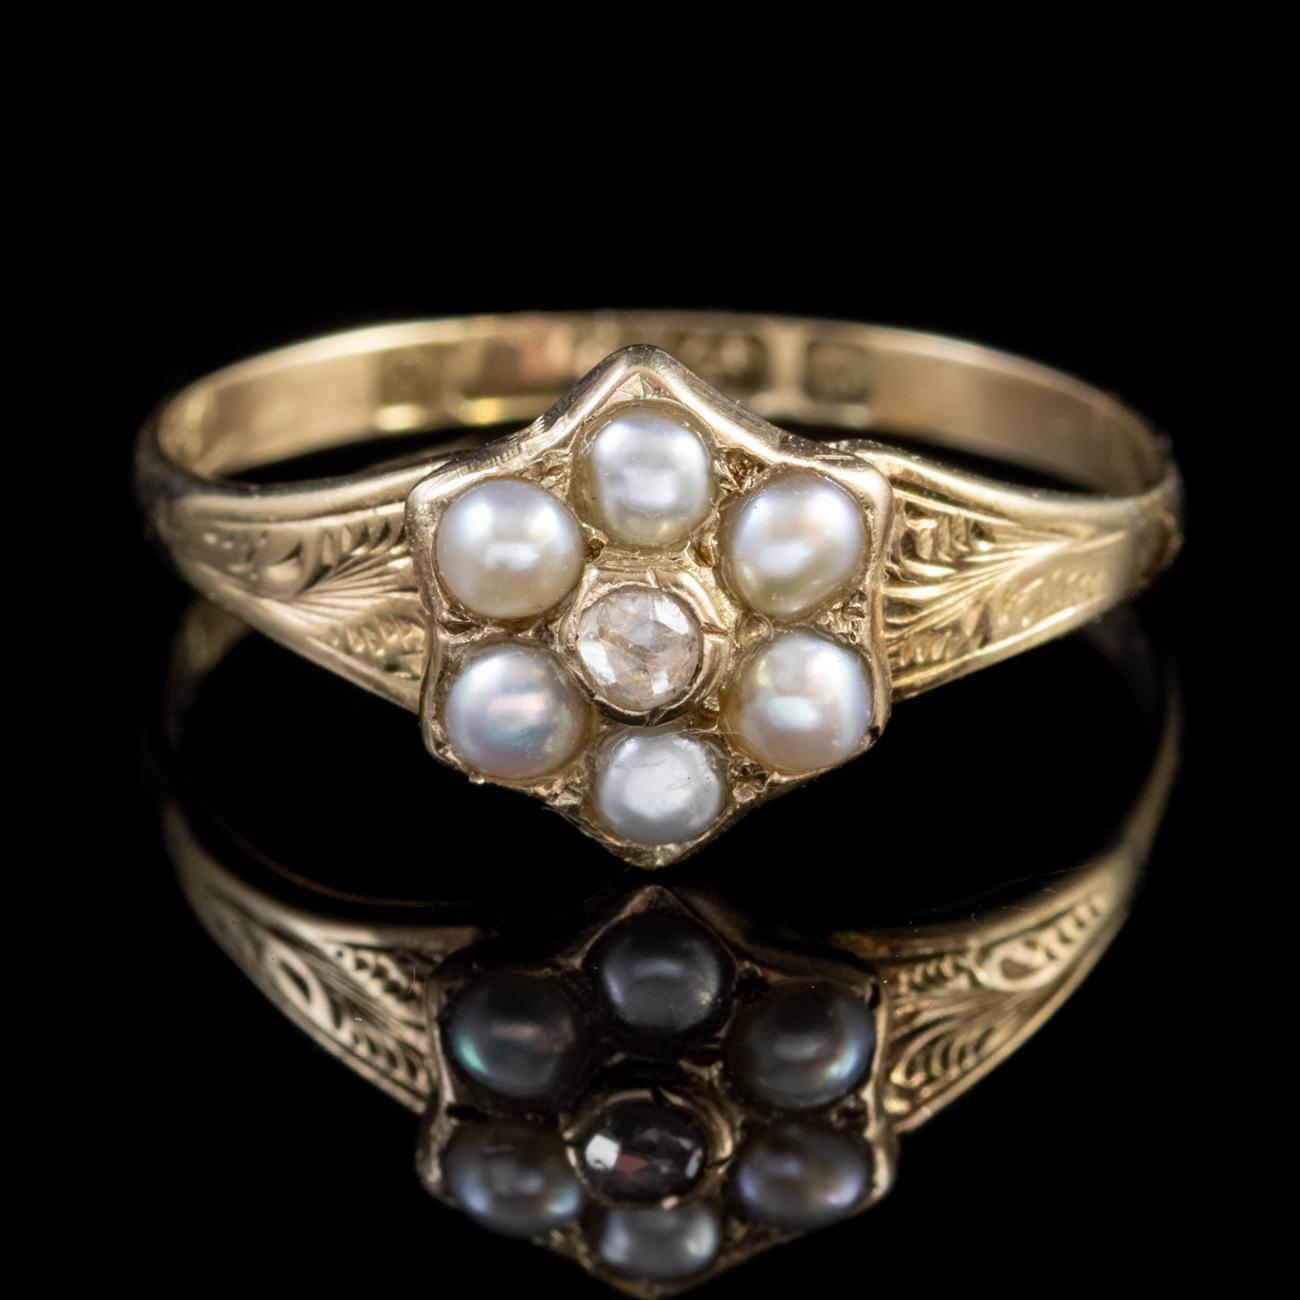 This beautiful ring has been modelled in 9ct Yellow Gold and features six gorgeous Pearls which halo a central sparkling old cut Diamond weighing approx. 0.10ct. The ring features lovely old engraved shoulders and also comes with a locket back. The